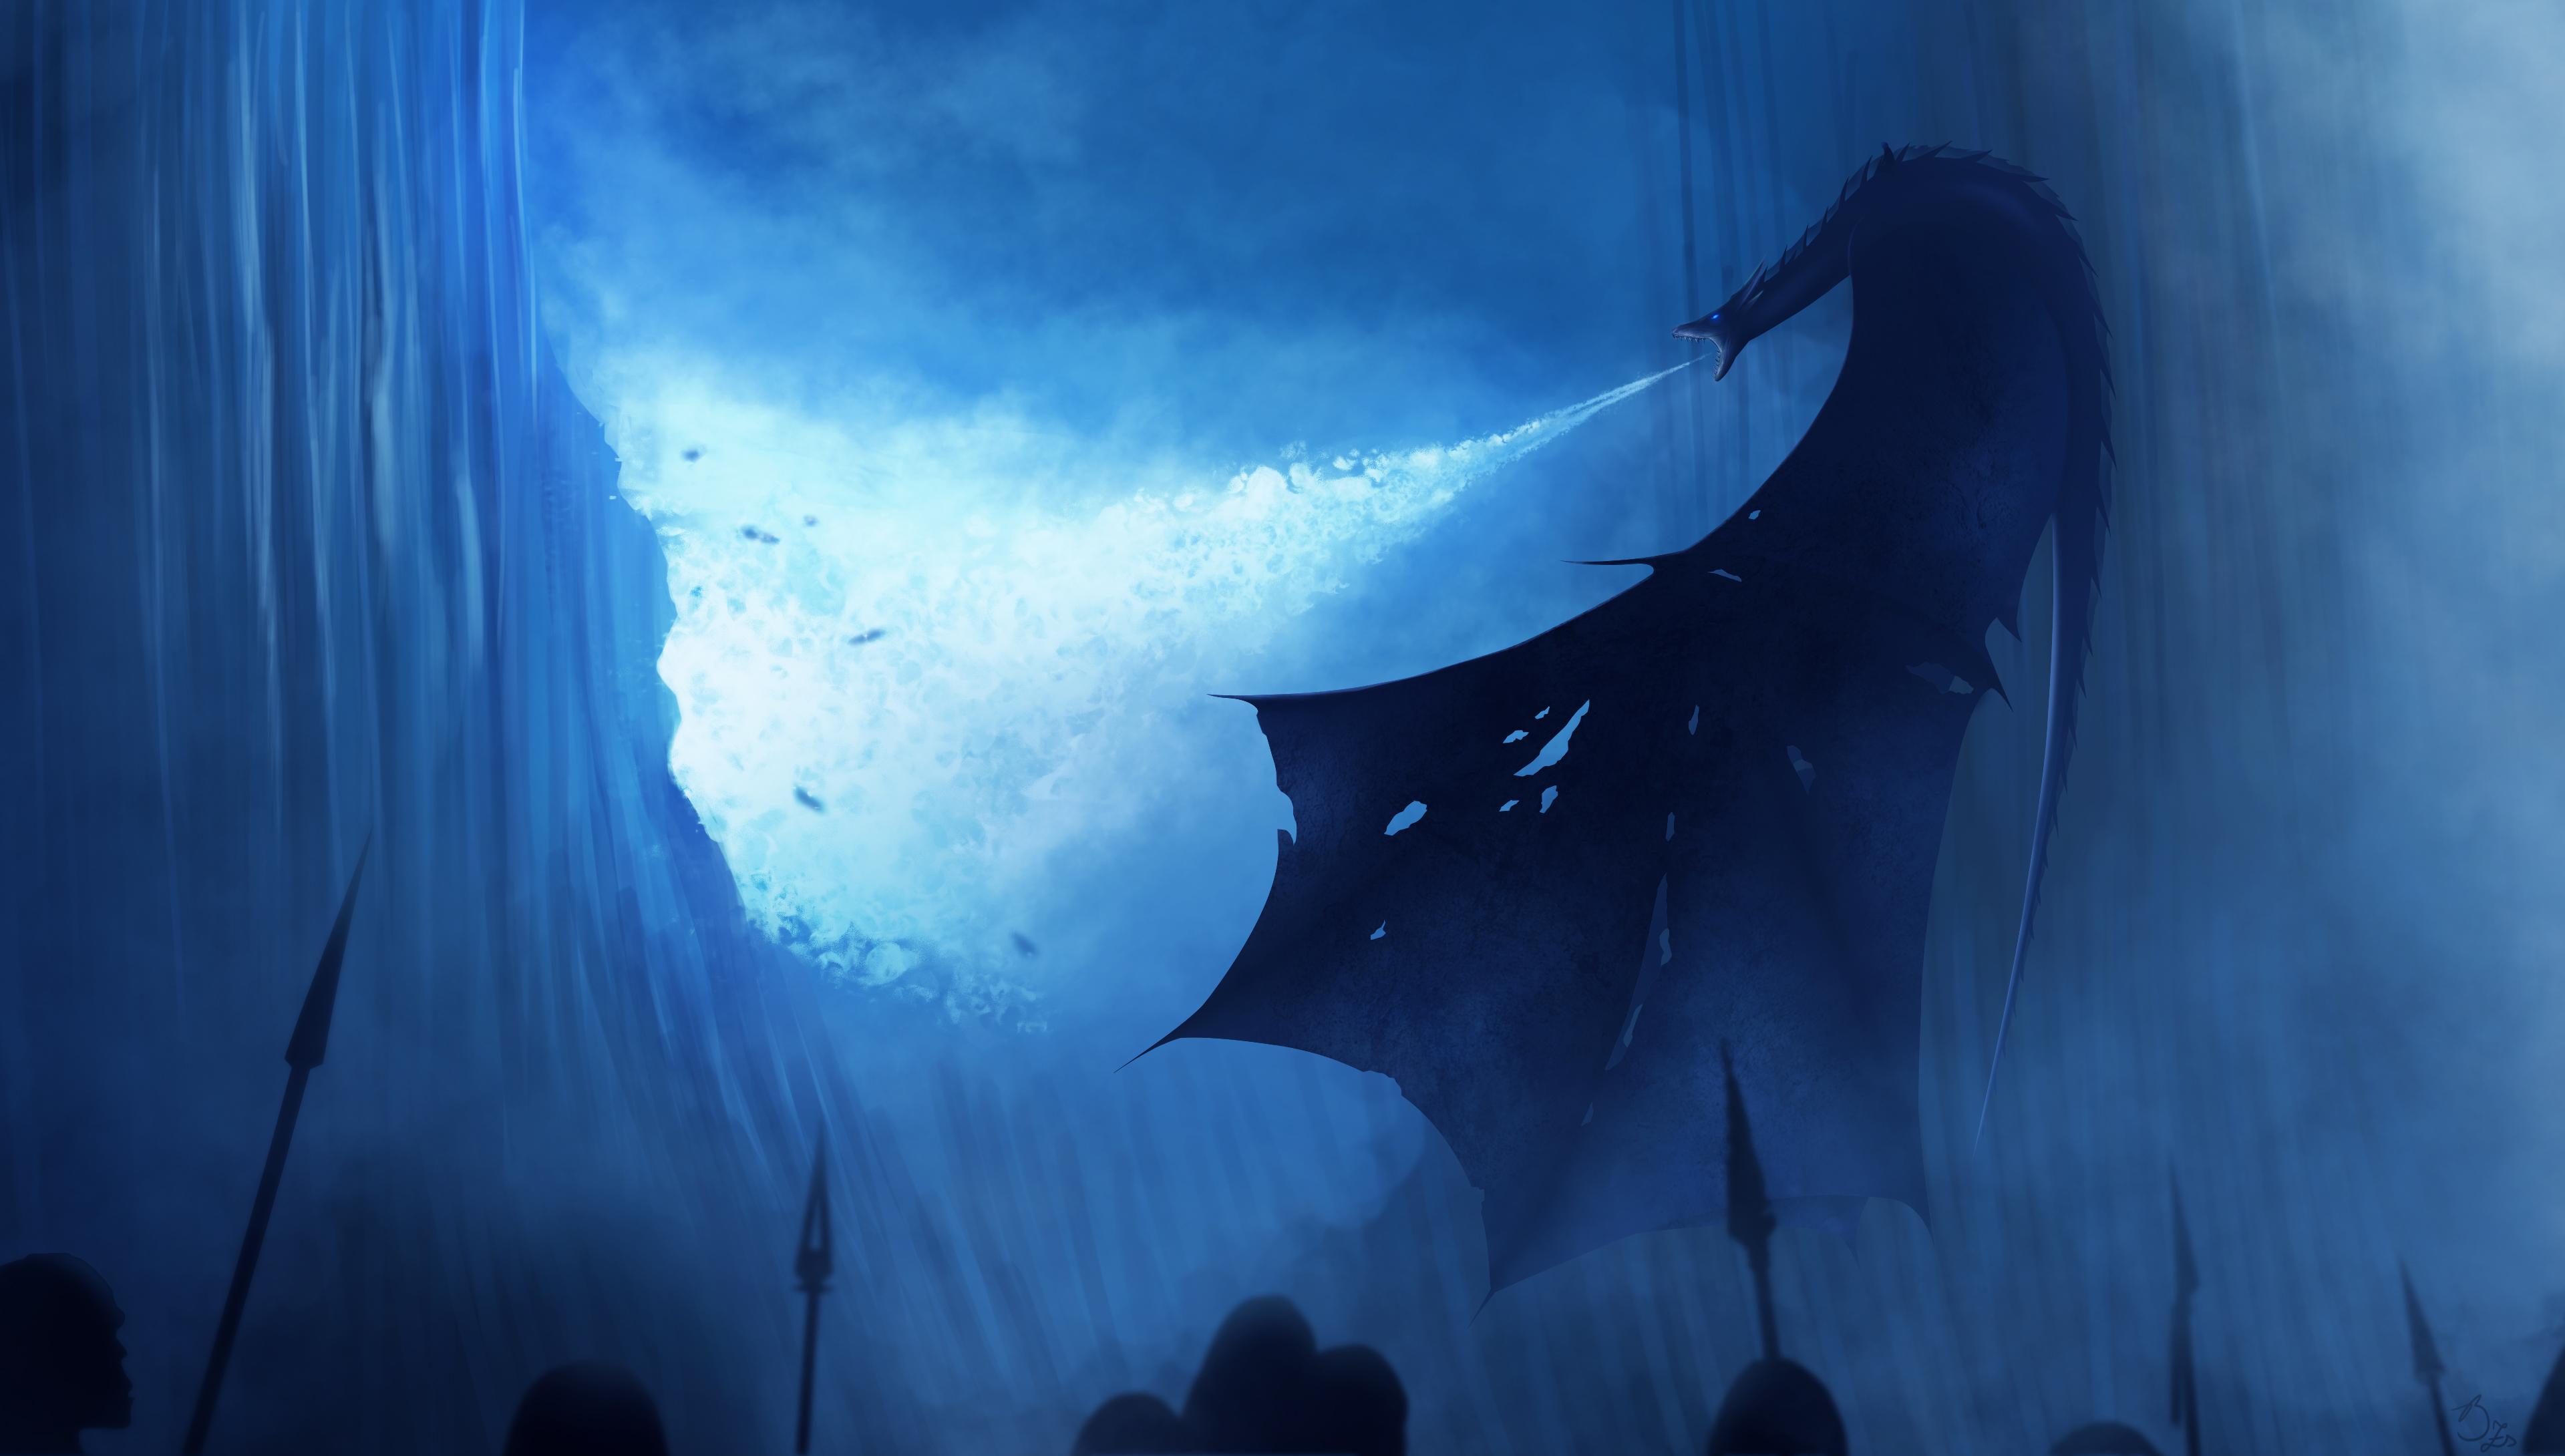 Game of Thrones 8K Wallpaper Free Game of Thrones 8K Background